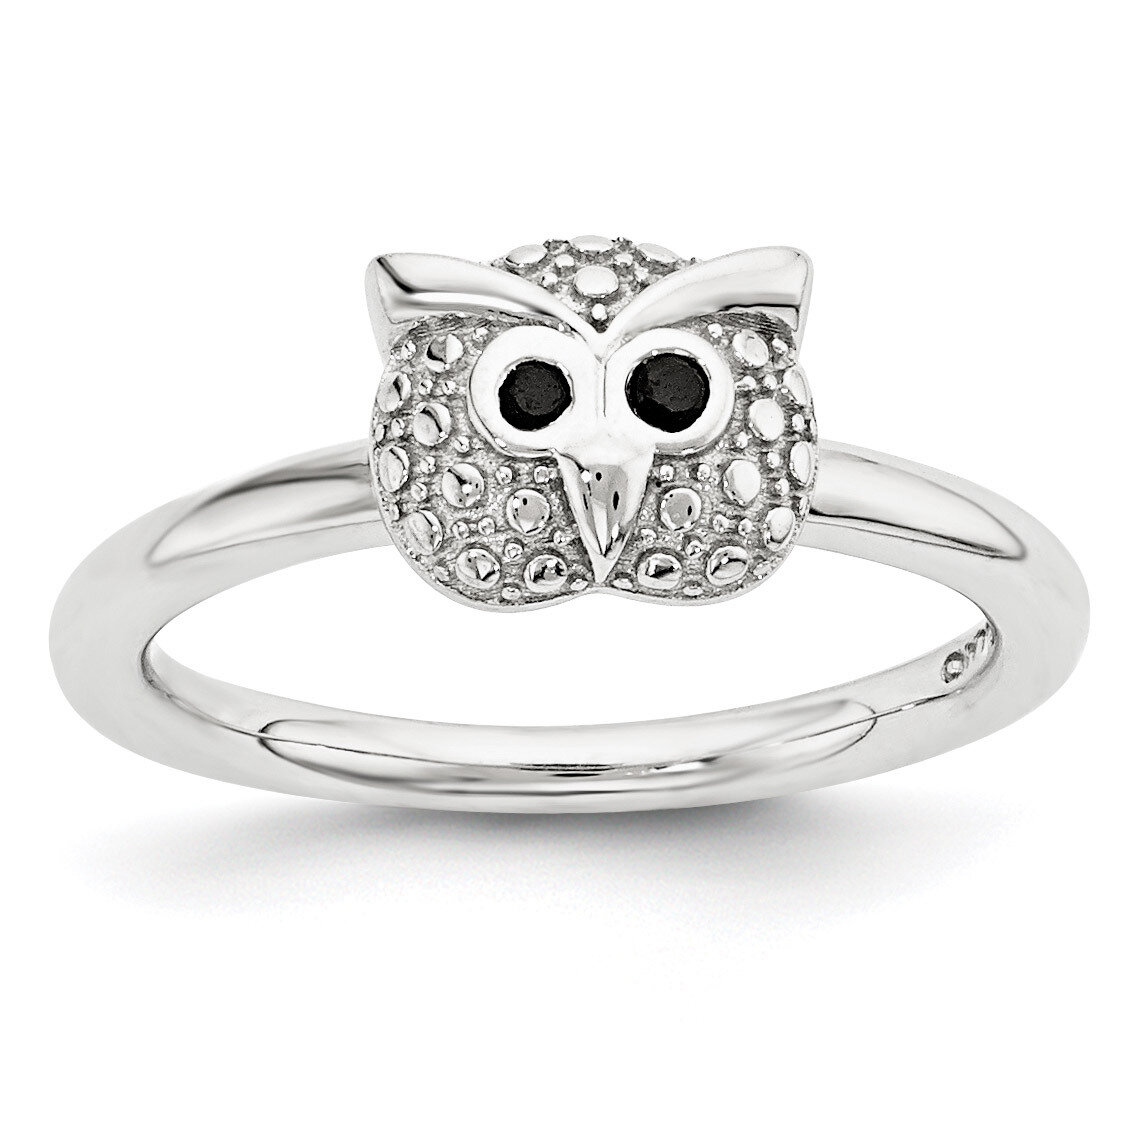 Onyx Owl Ring Sterling Silver Polished QSK1869